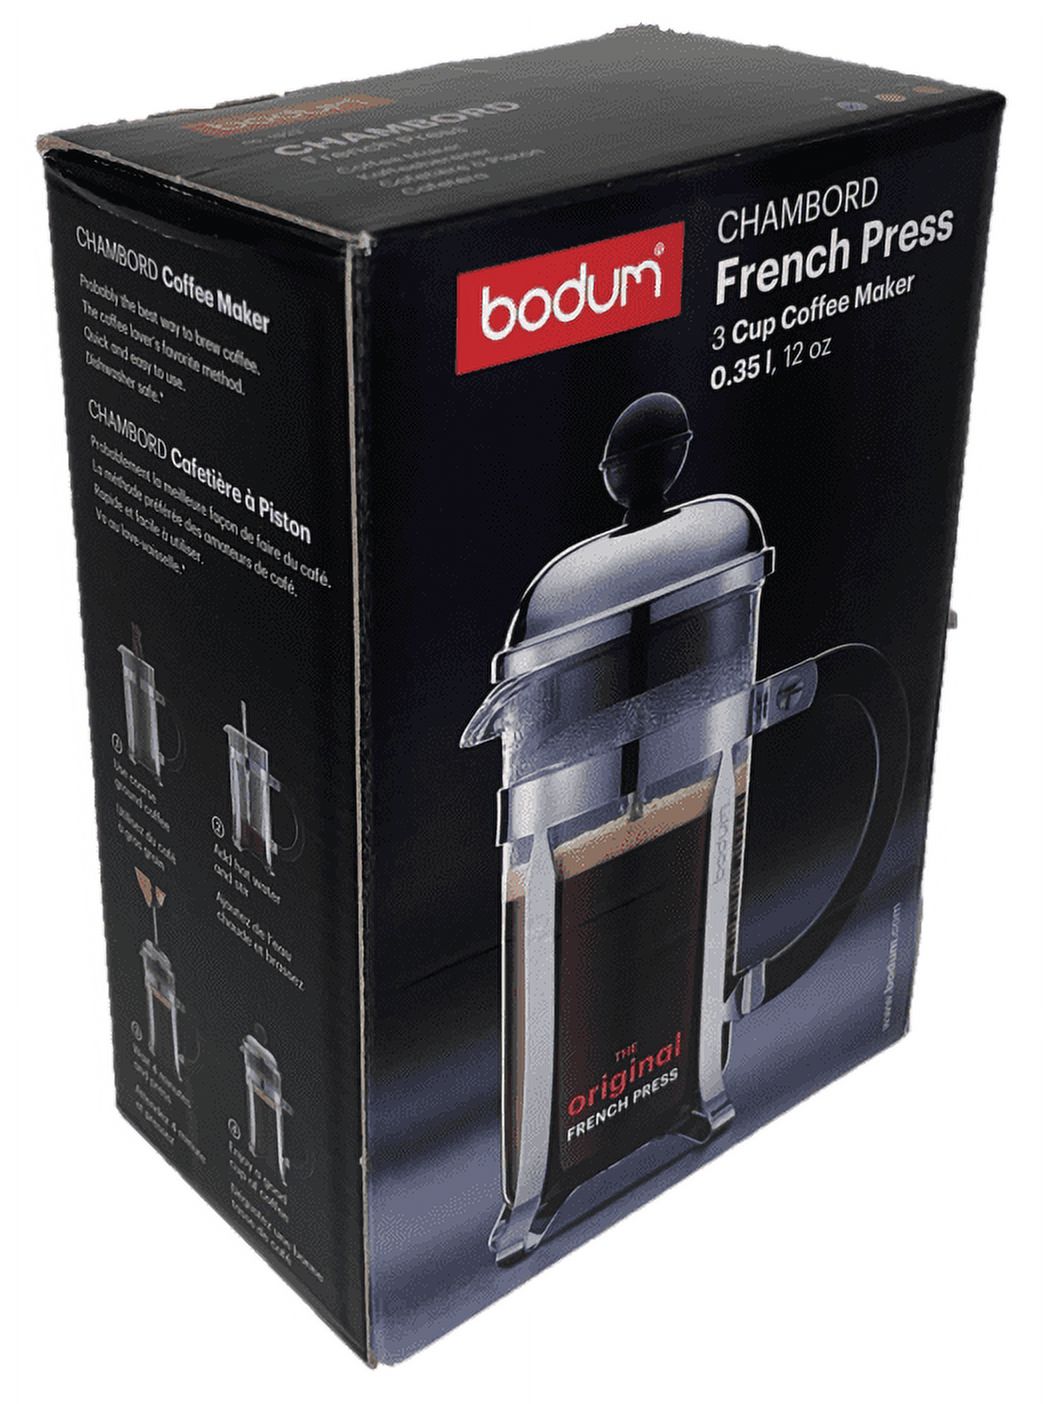 BODUM Chambord French Press Coffee Maker, 12 Ounce, Stainless Steel - image 7 of 7